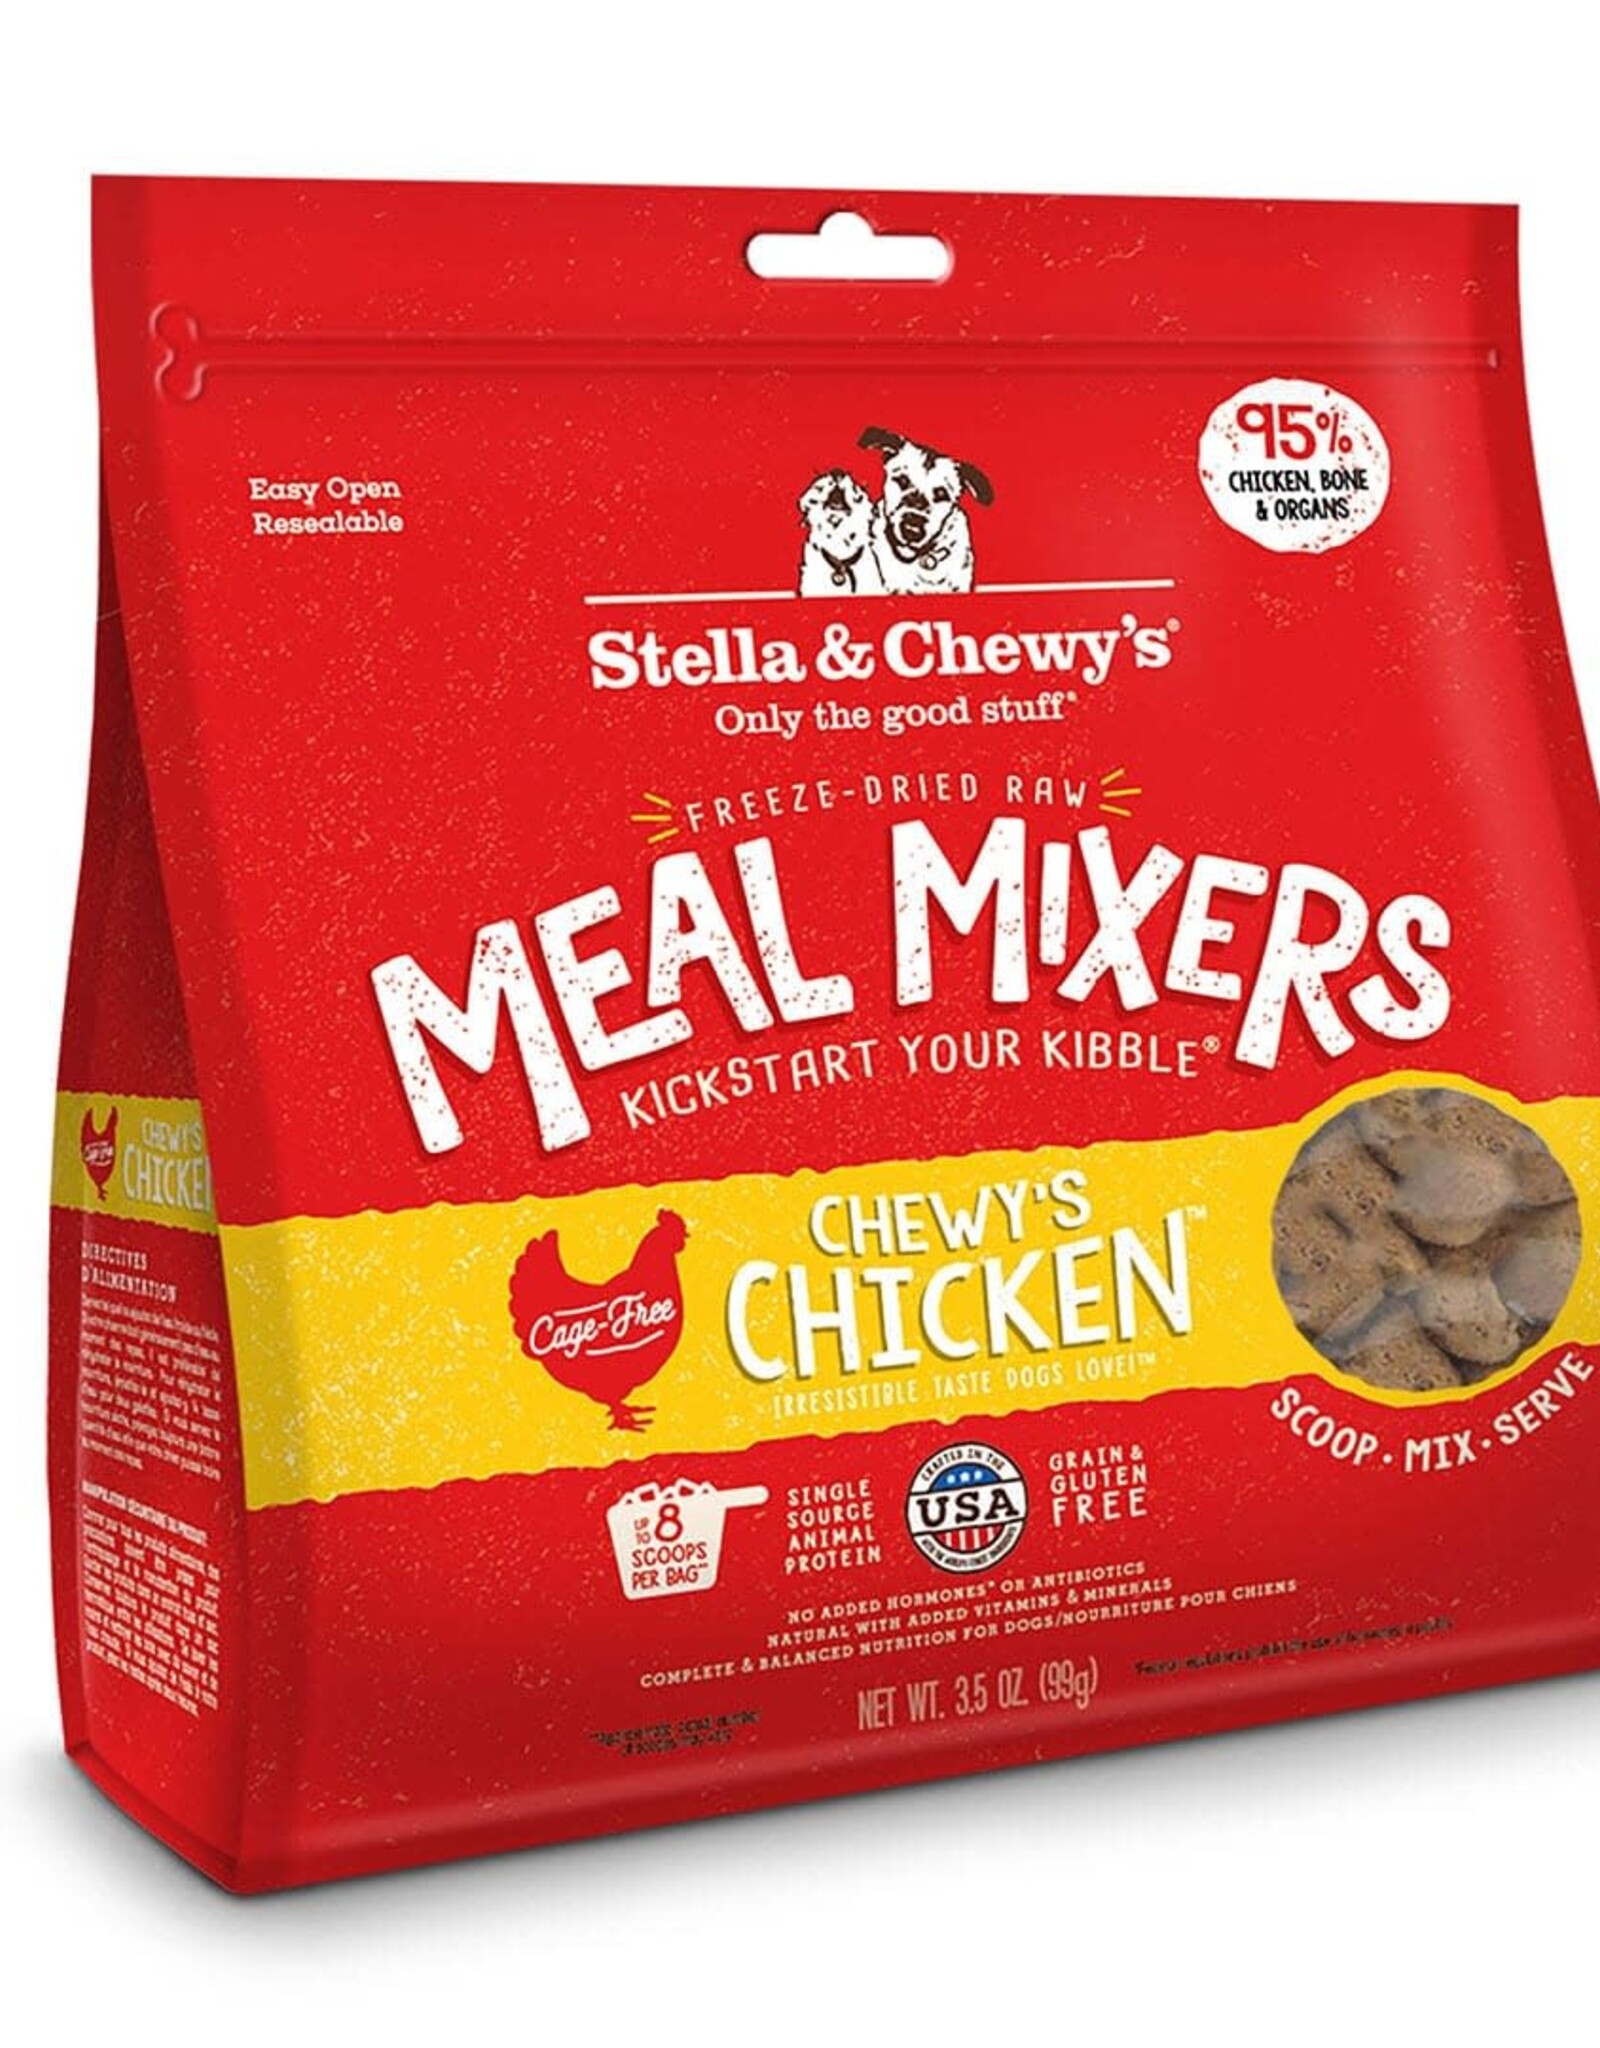 STELLA & CHEWY'S LLC STELLA & CHEWY'S DOG FREEZE DRIED CHICKEN MEAL MIXERS 8OZ